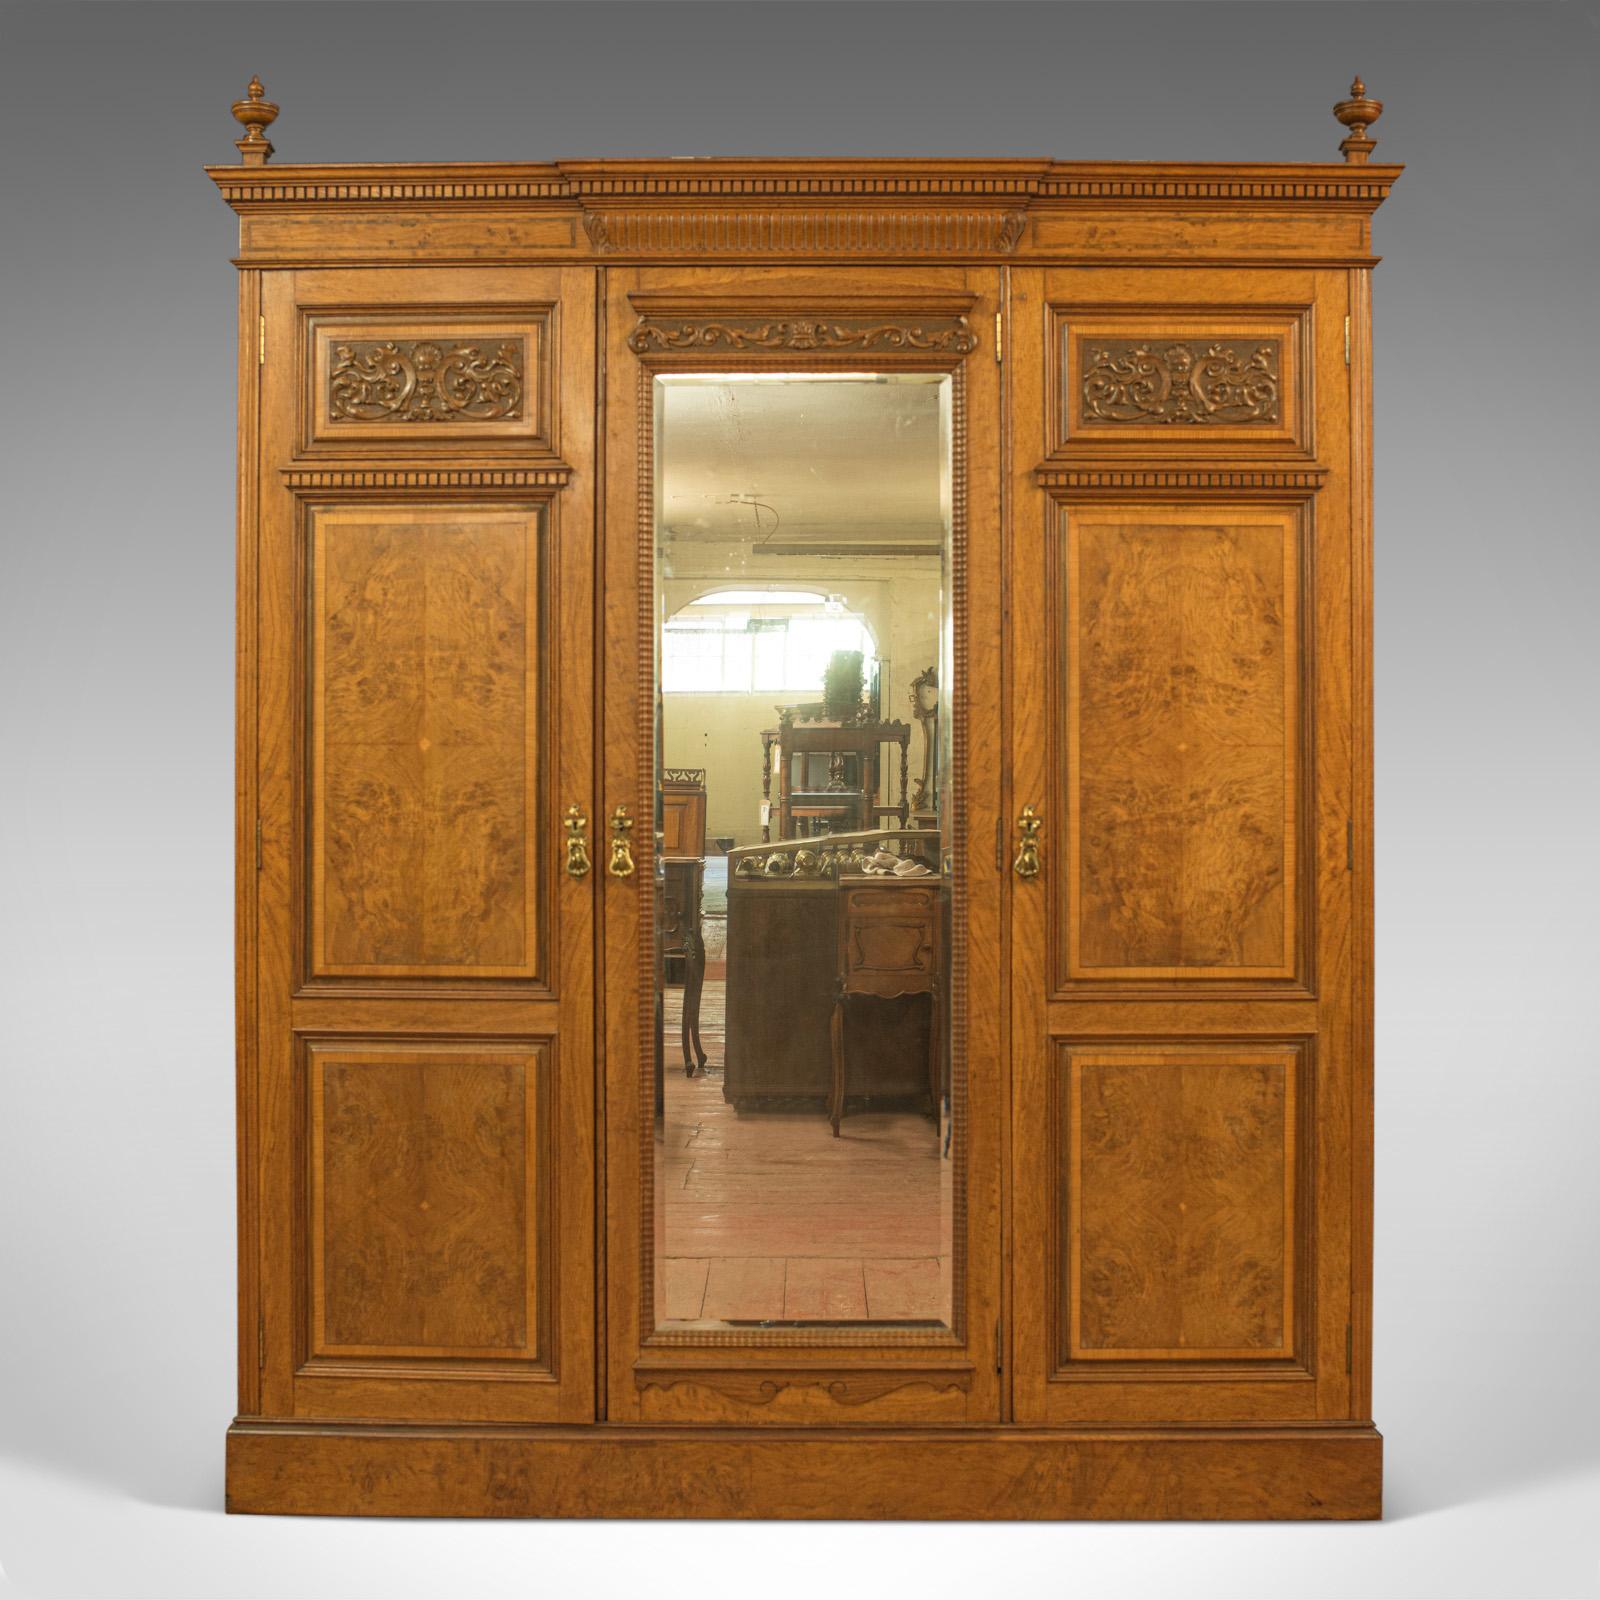 This is an antique triple wardrobe. A Scottish, oak and burr walnut compactum dating to the mid-Victorian period of the 19th century, circa 1870.

Superior cuts of oak and burr walnut enchant with rich caramel hues and fine grain